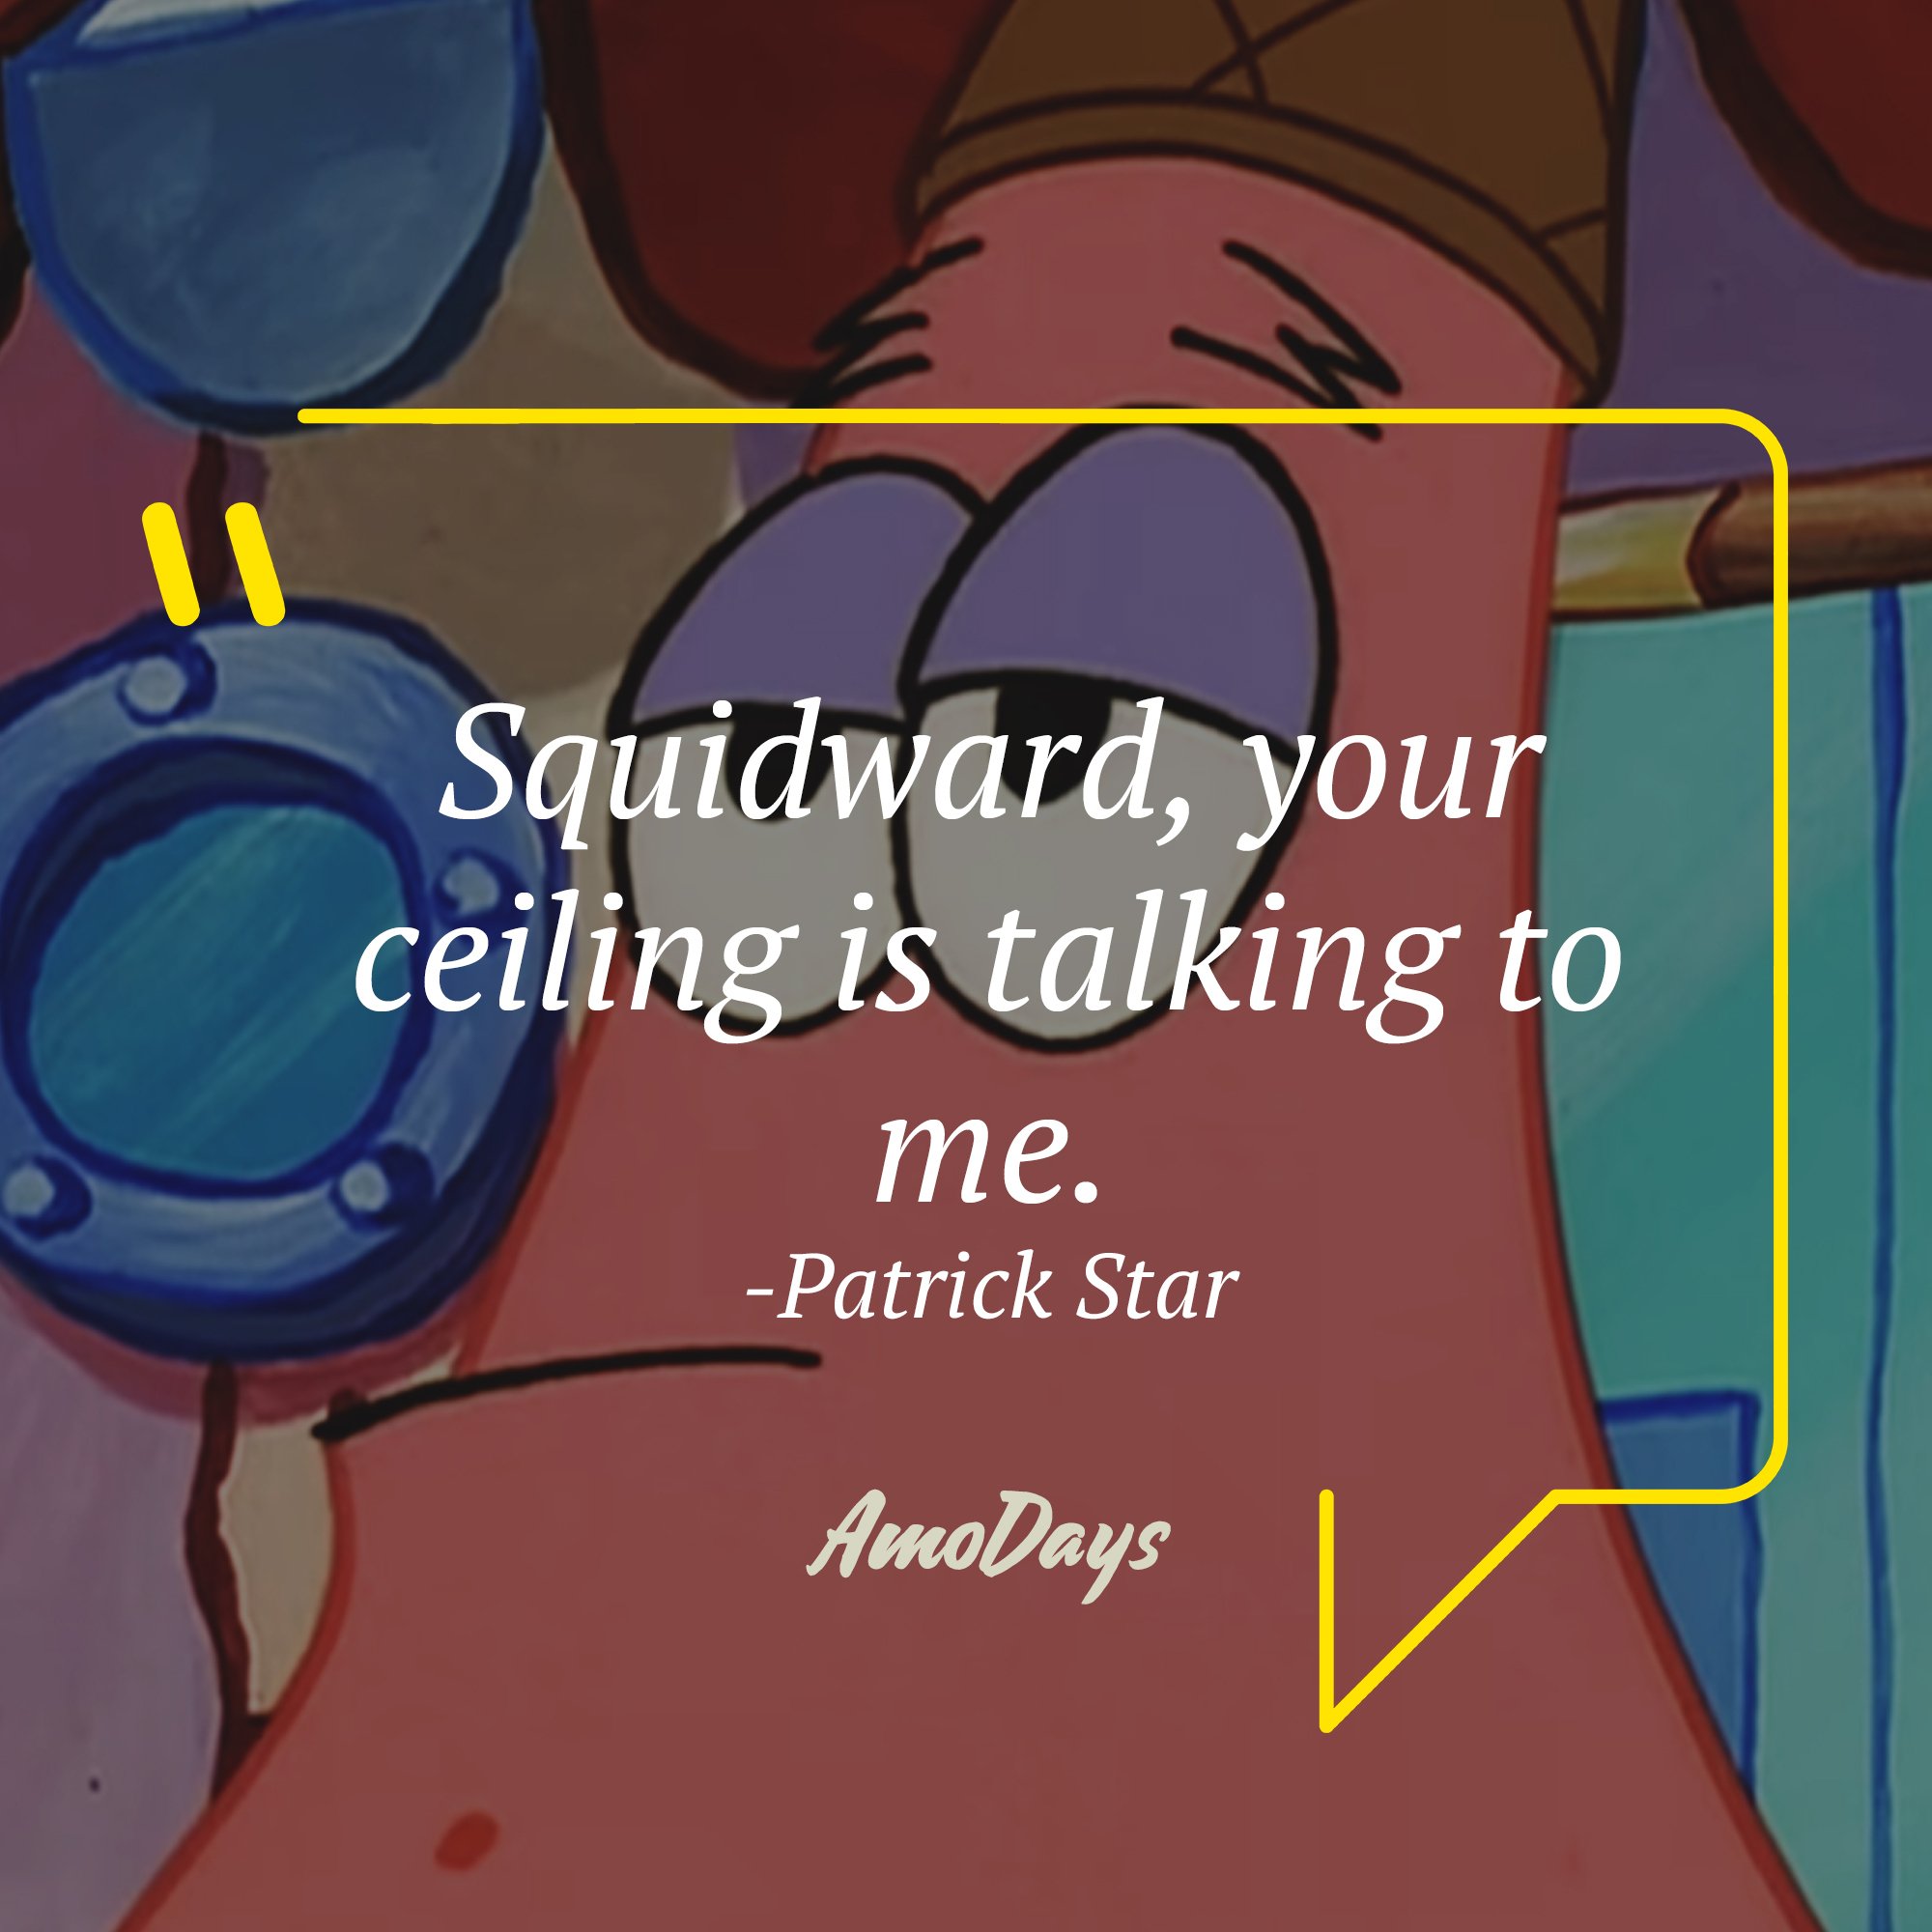  Patrick Star's quote: "Squidward, your ceiling is talking to me." | Source: AmoDays